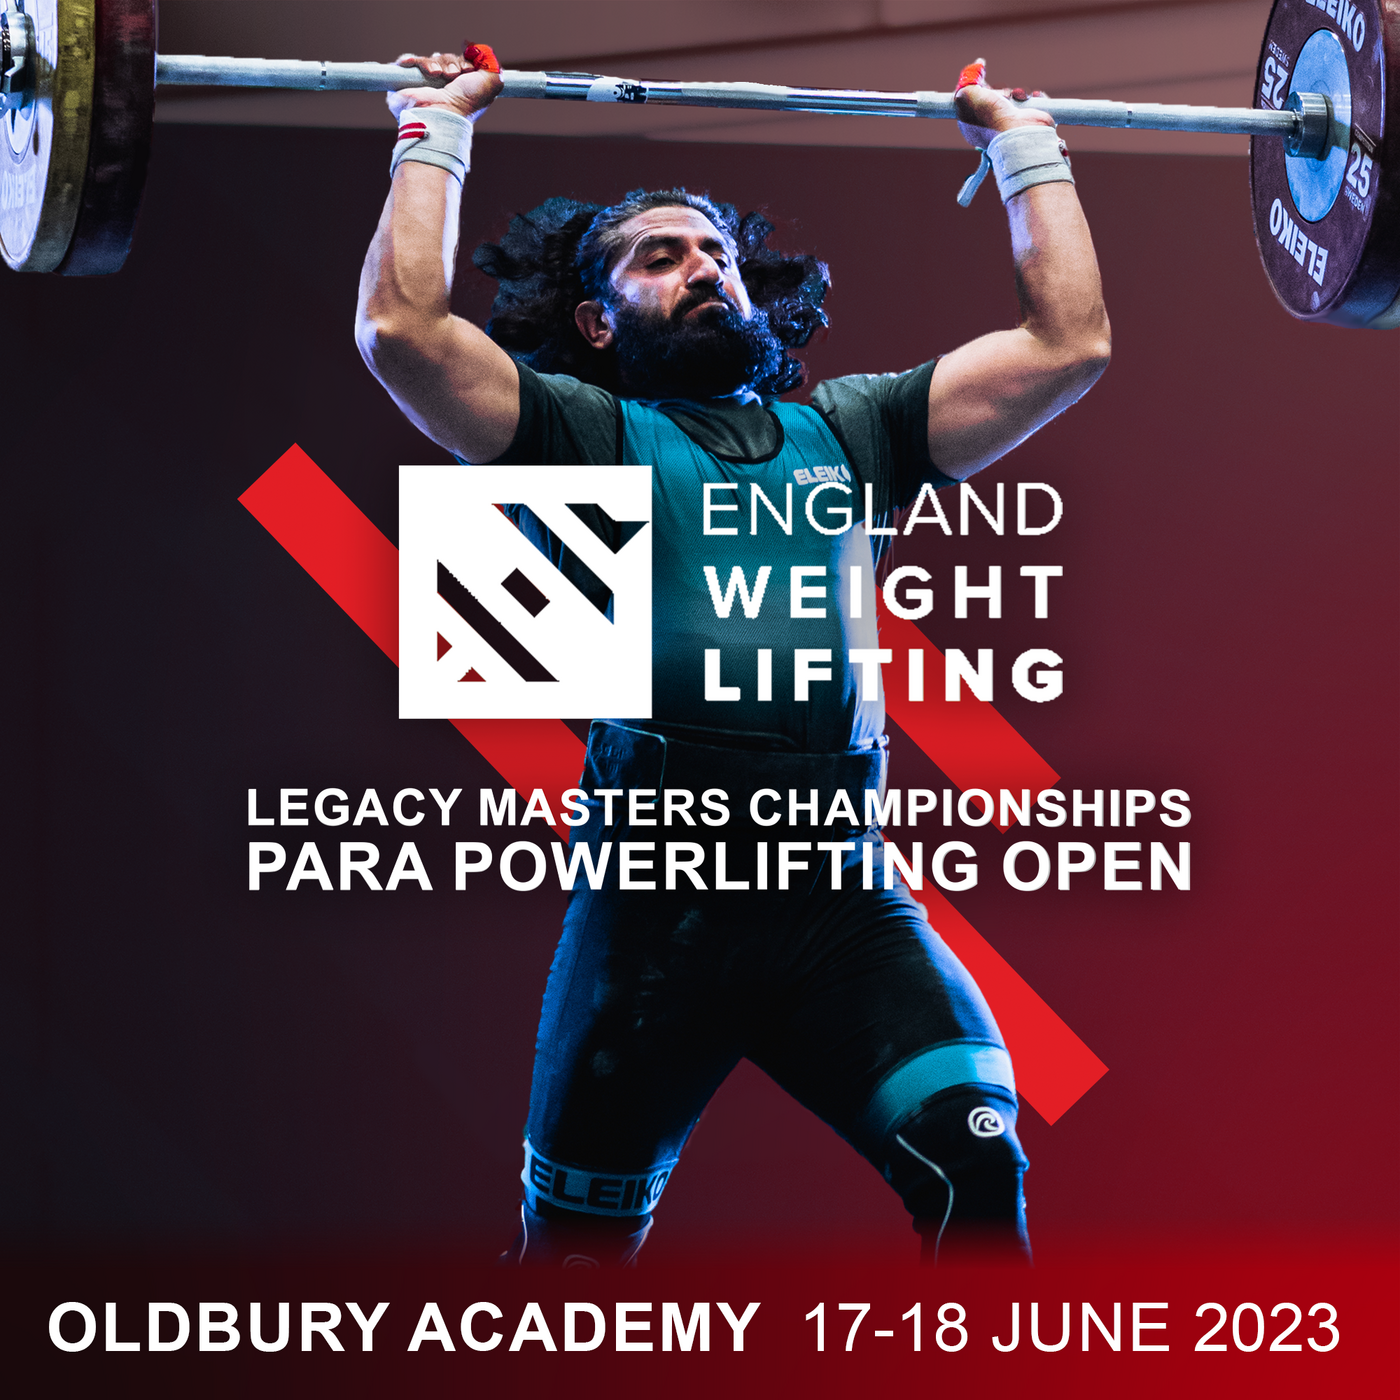 England Legacy Masters Championships and Para Powerlifting Open